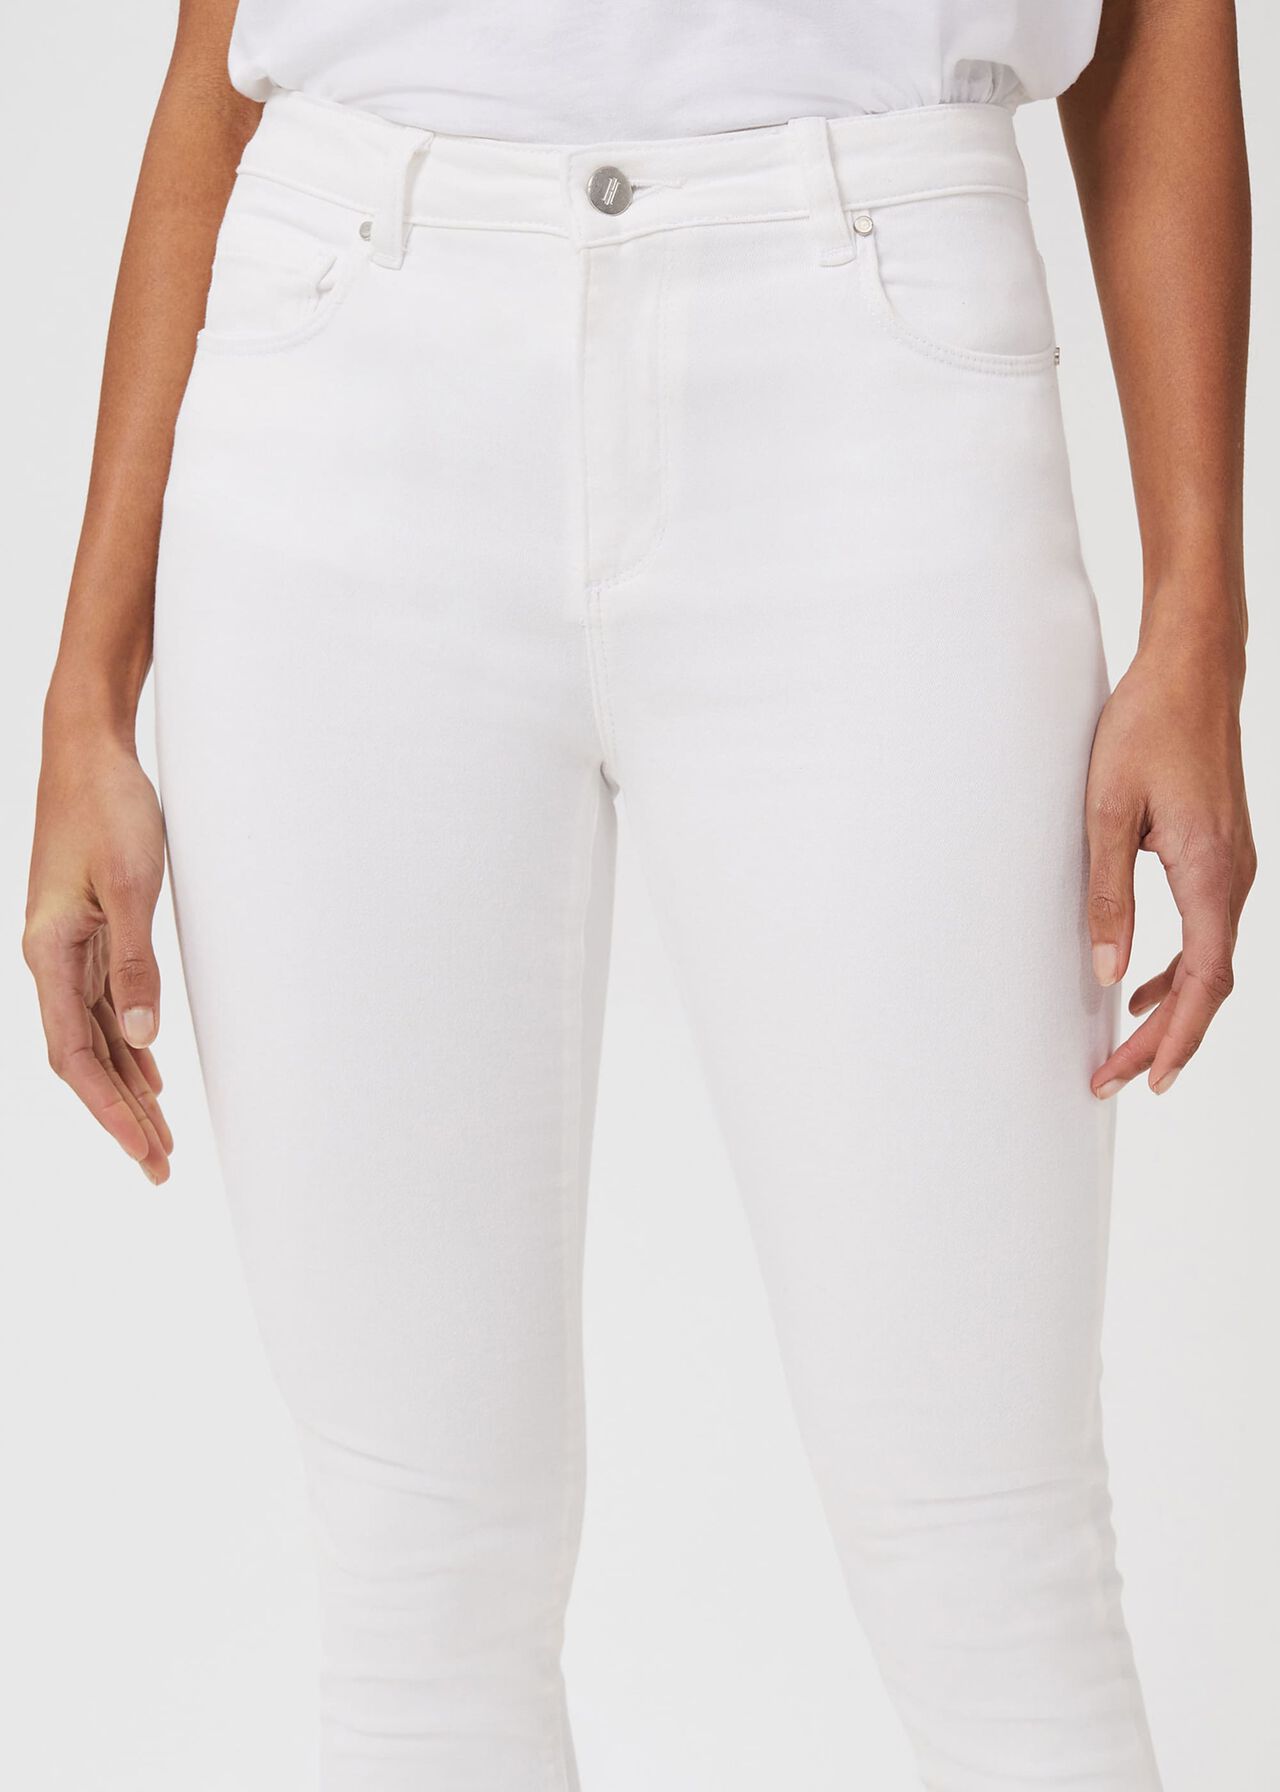 Marianne Denim 7/8 Jeans With Stretch, White, hi-res